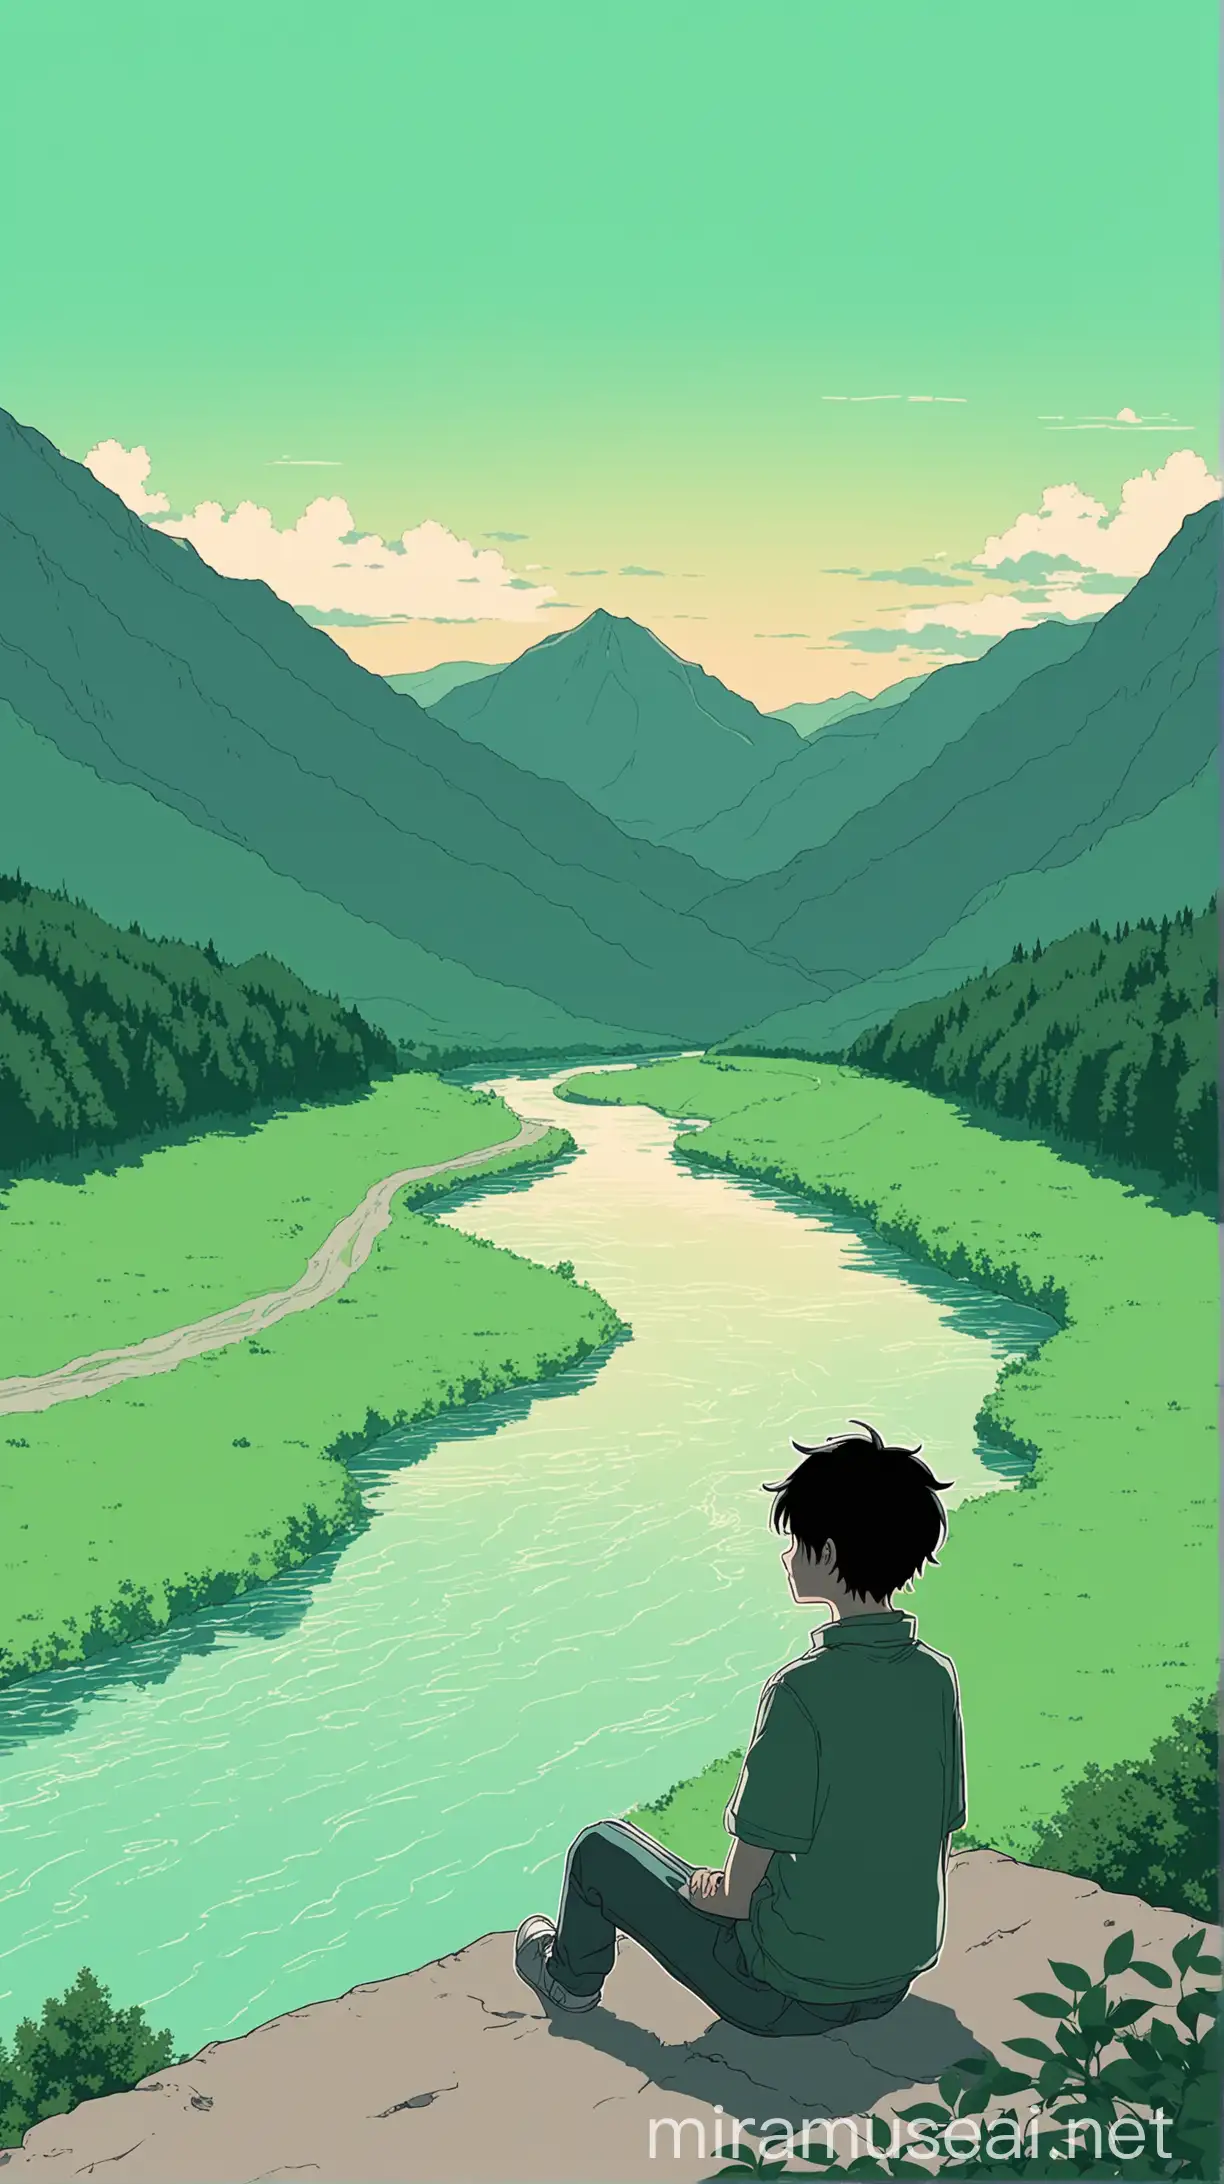 vector cute aesthetic anime, boy seat front of river, mountain, lo-fi, nature, sky, green, silence